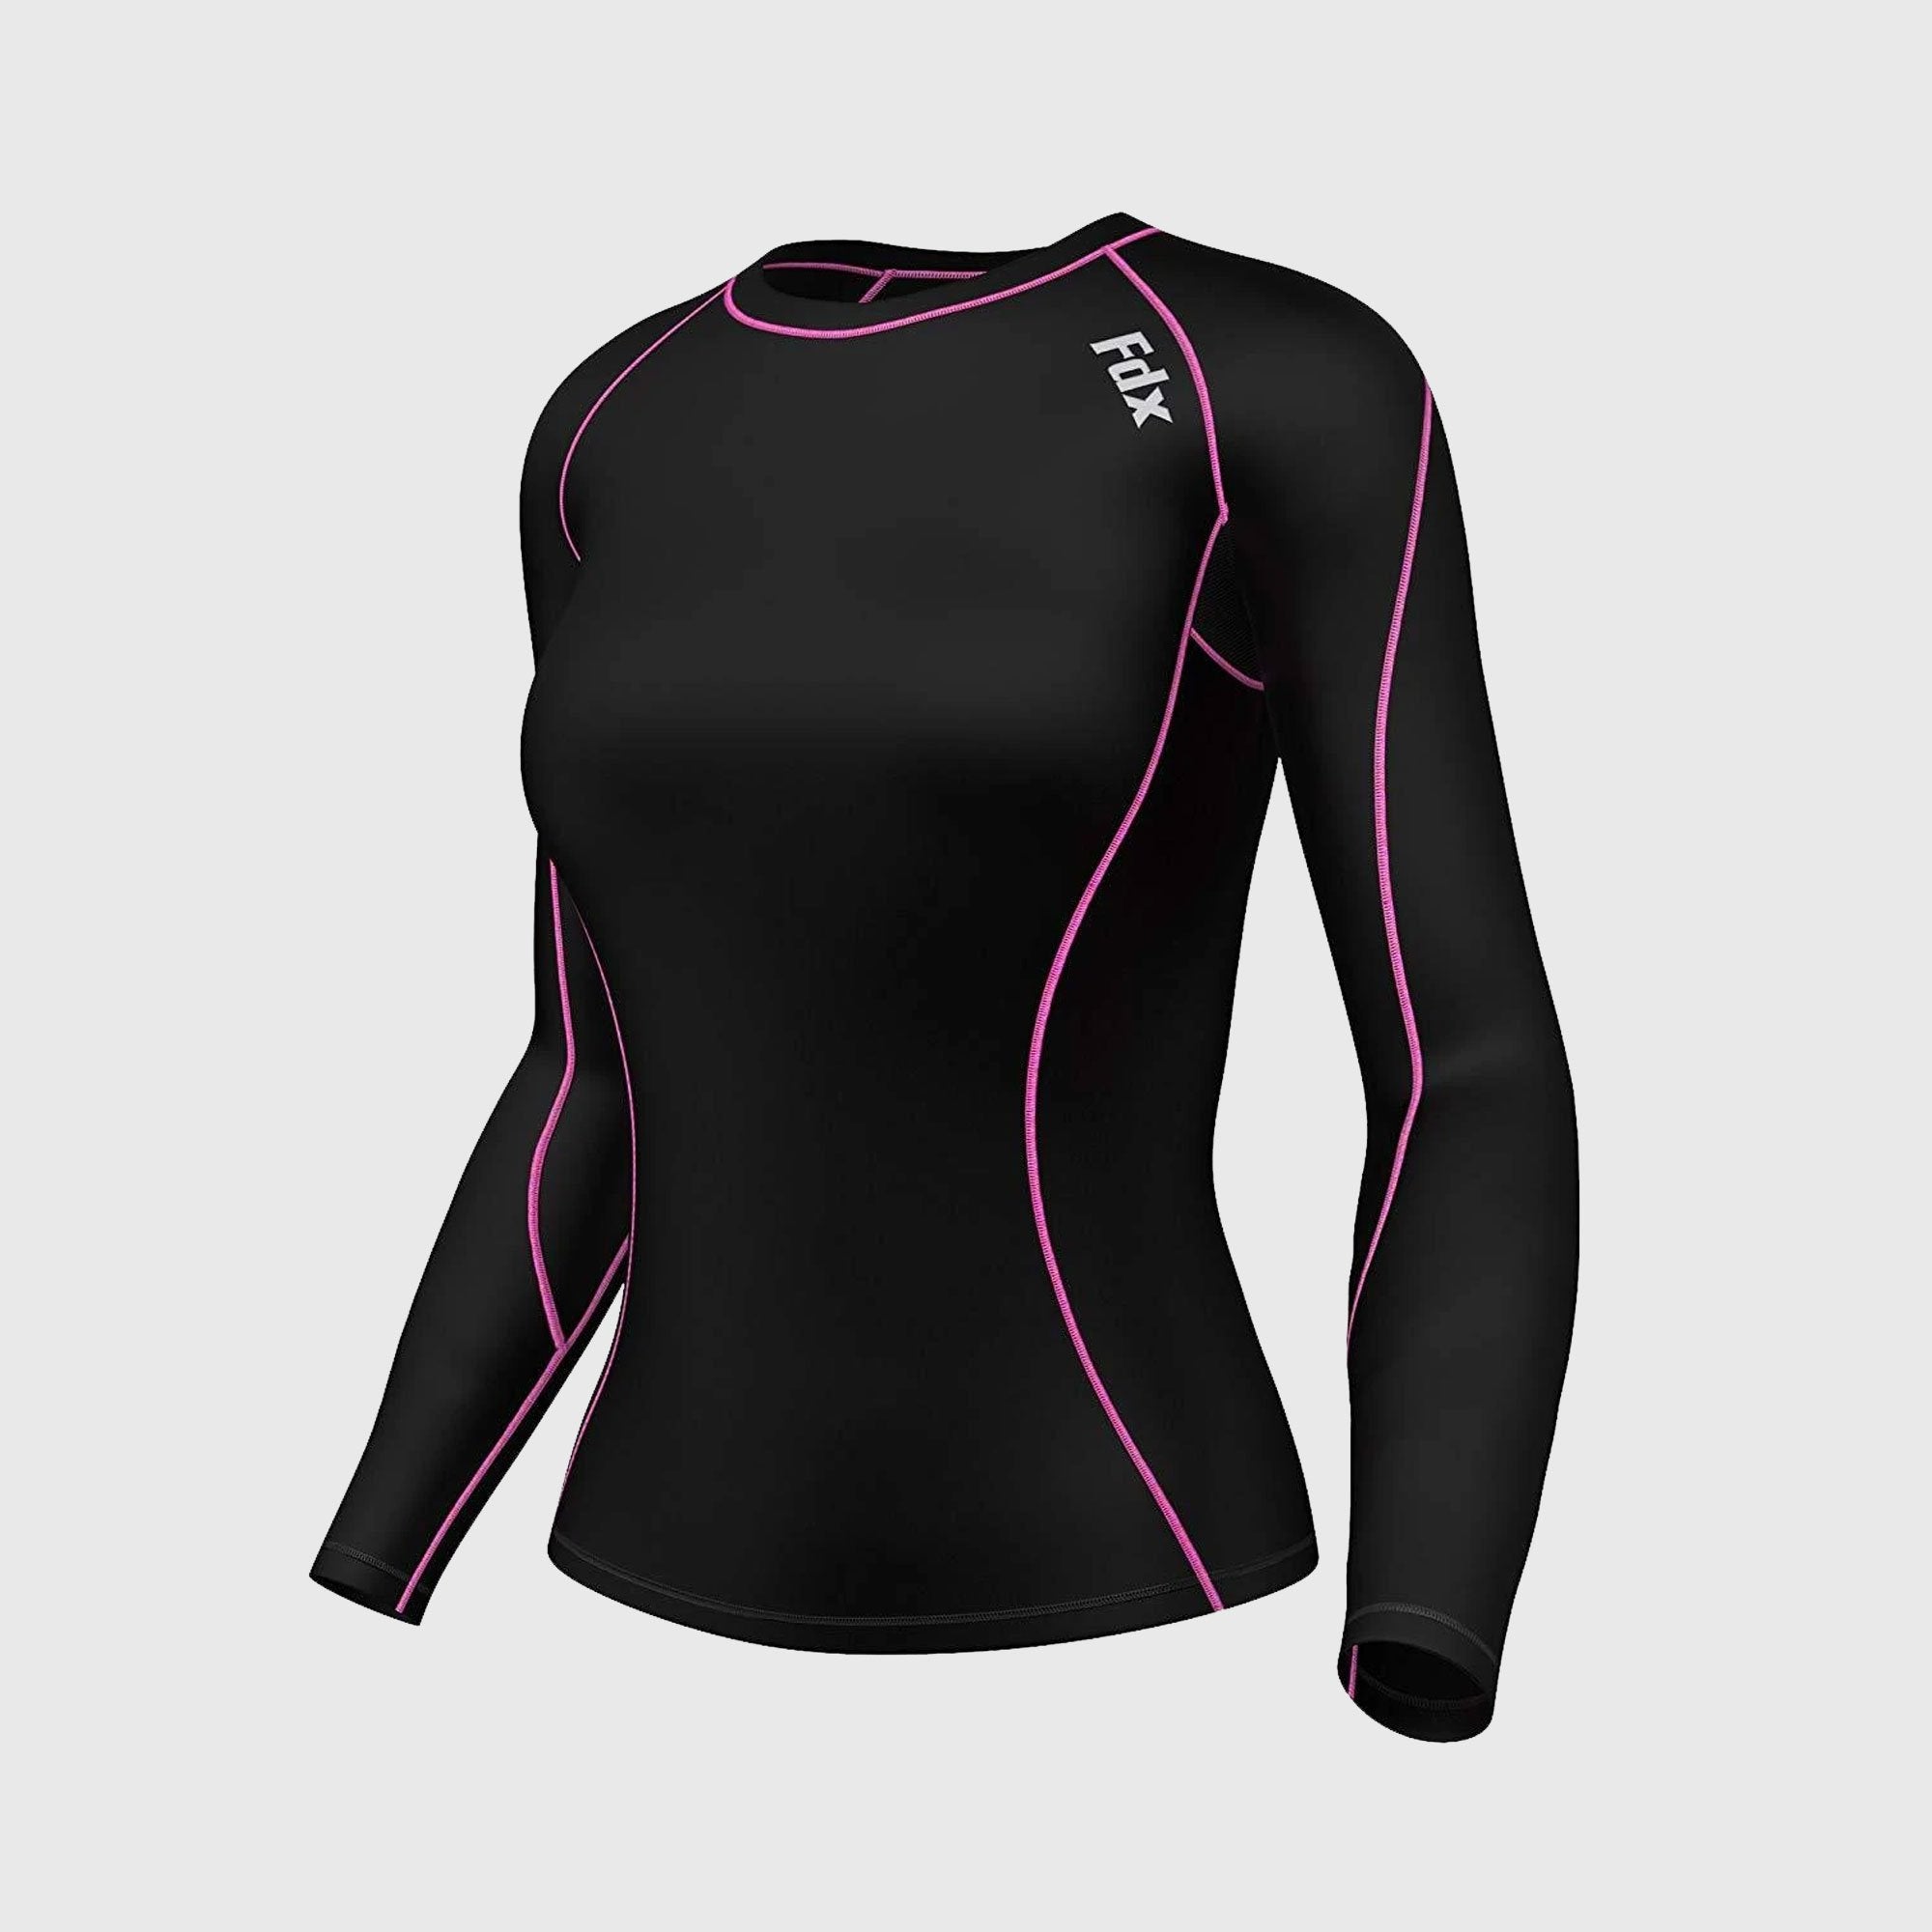 Fdx Women's Pink Black Long Sleeve Ultralight Compression Top Running Gym Workout Wear Rash Guard Stretchable Breathable Quick Dry - Monarch